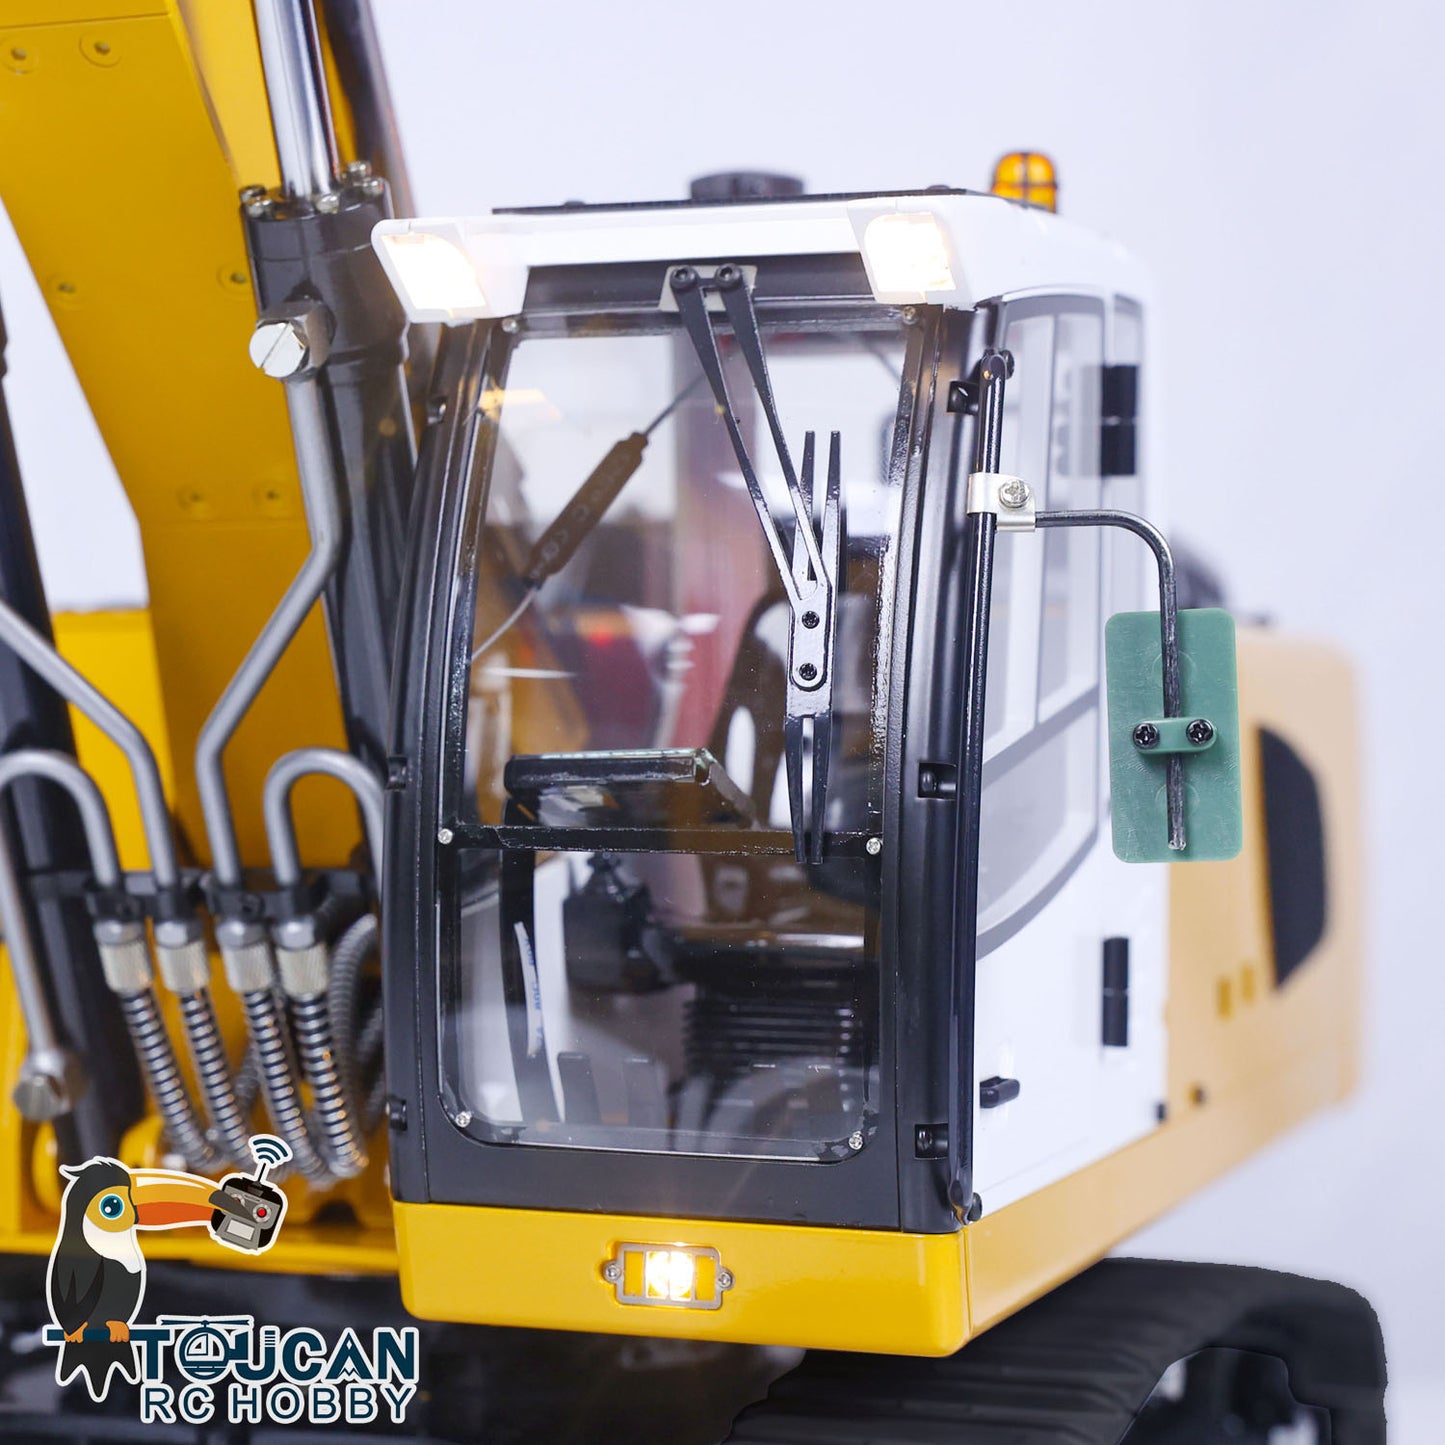 1/14 RC Hydraulic Excavator 946 Digger Clamshell Bucket Ripper Metal Booms Tracks Bucket Rotation Cabin Oil Tube Easter Sale